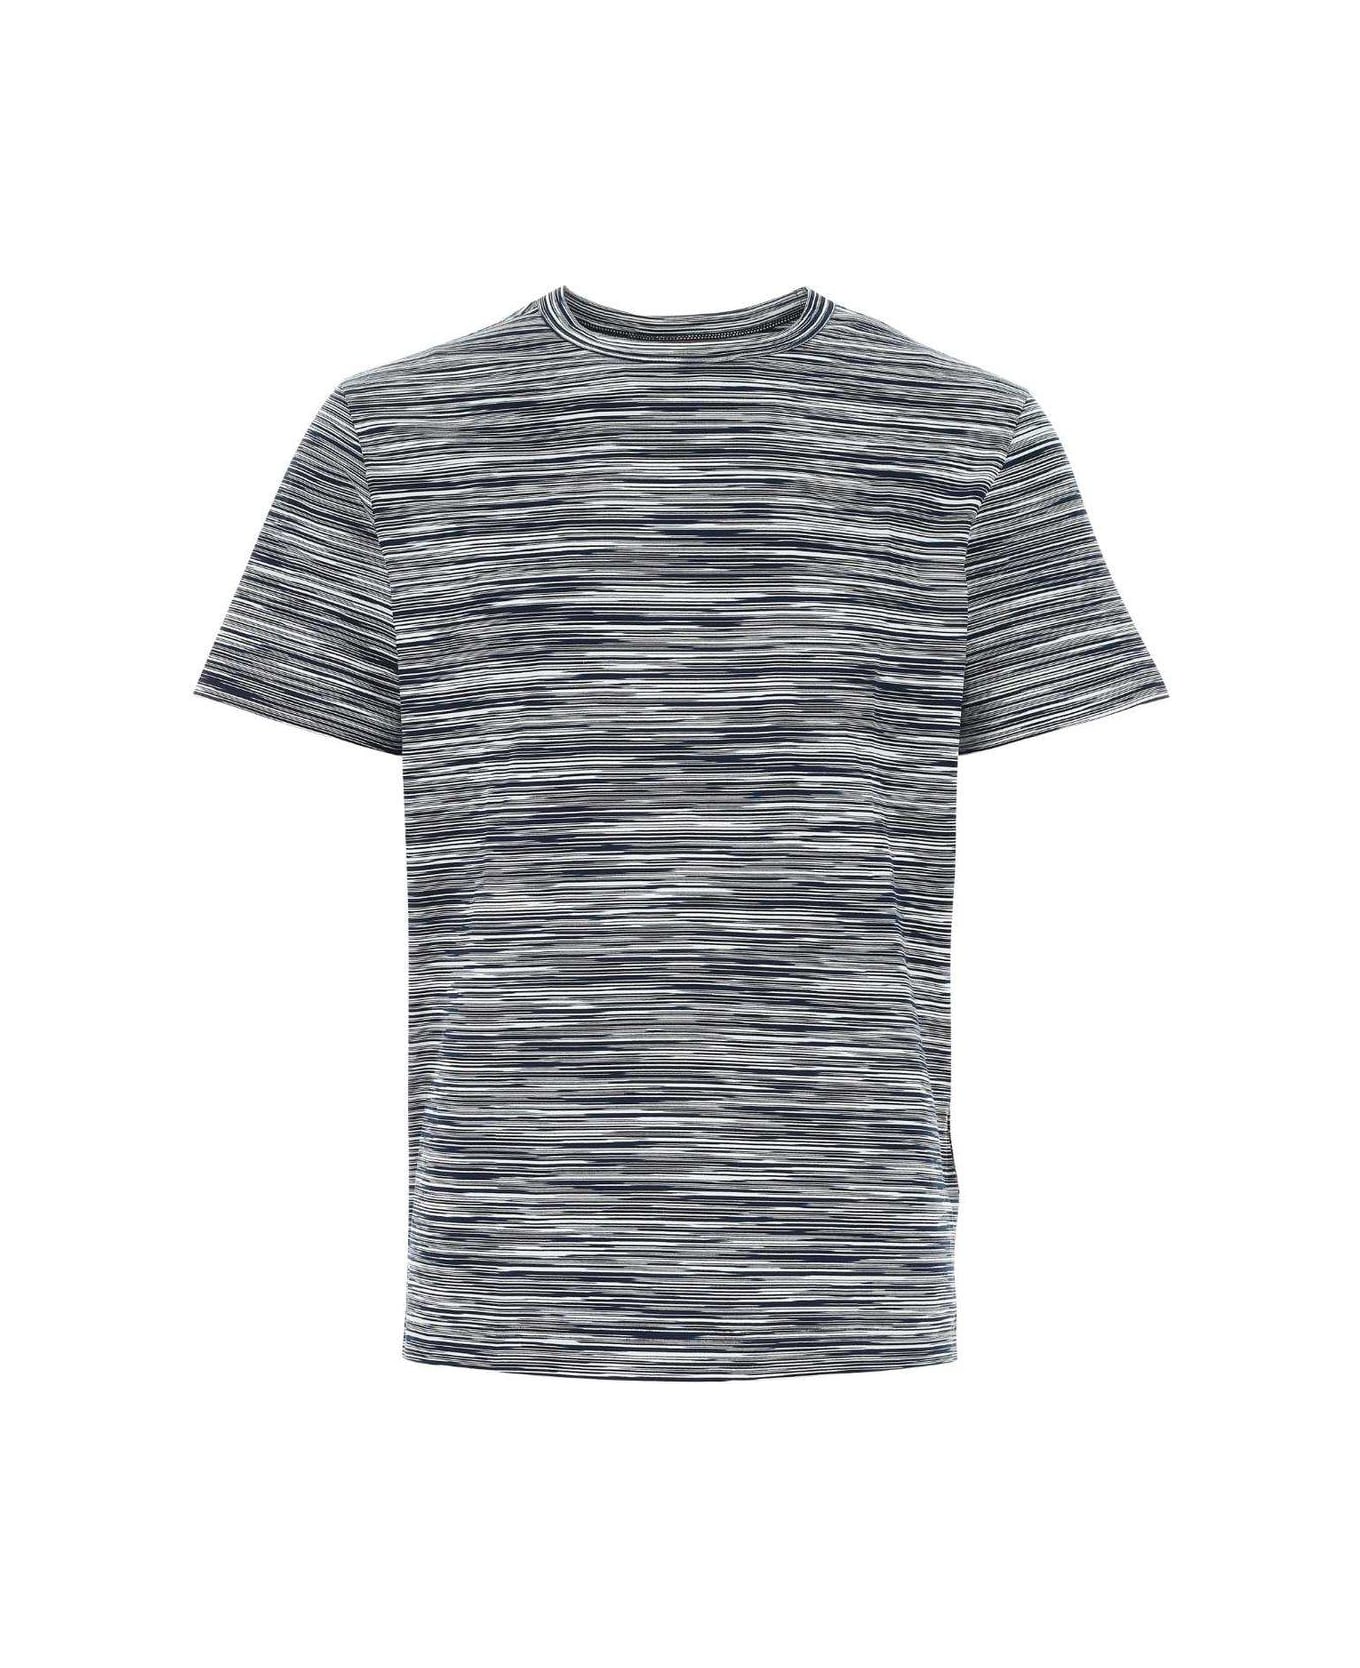 Missoni Striped Knitted Crewneck T-shirt - NAVY